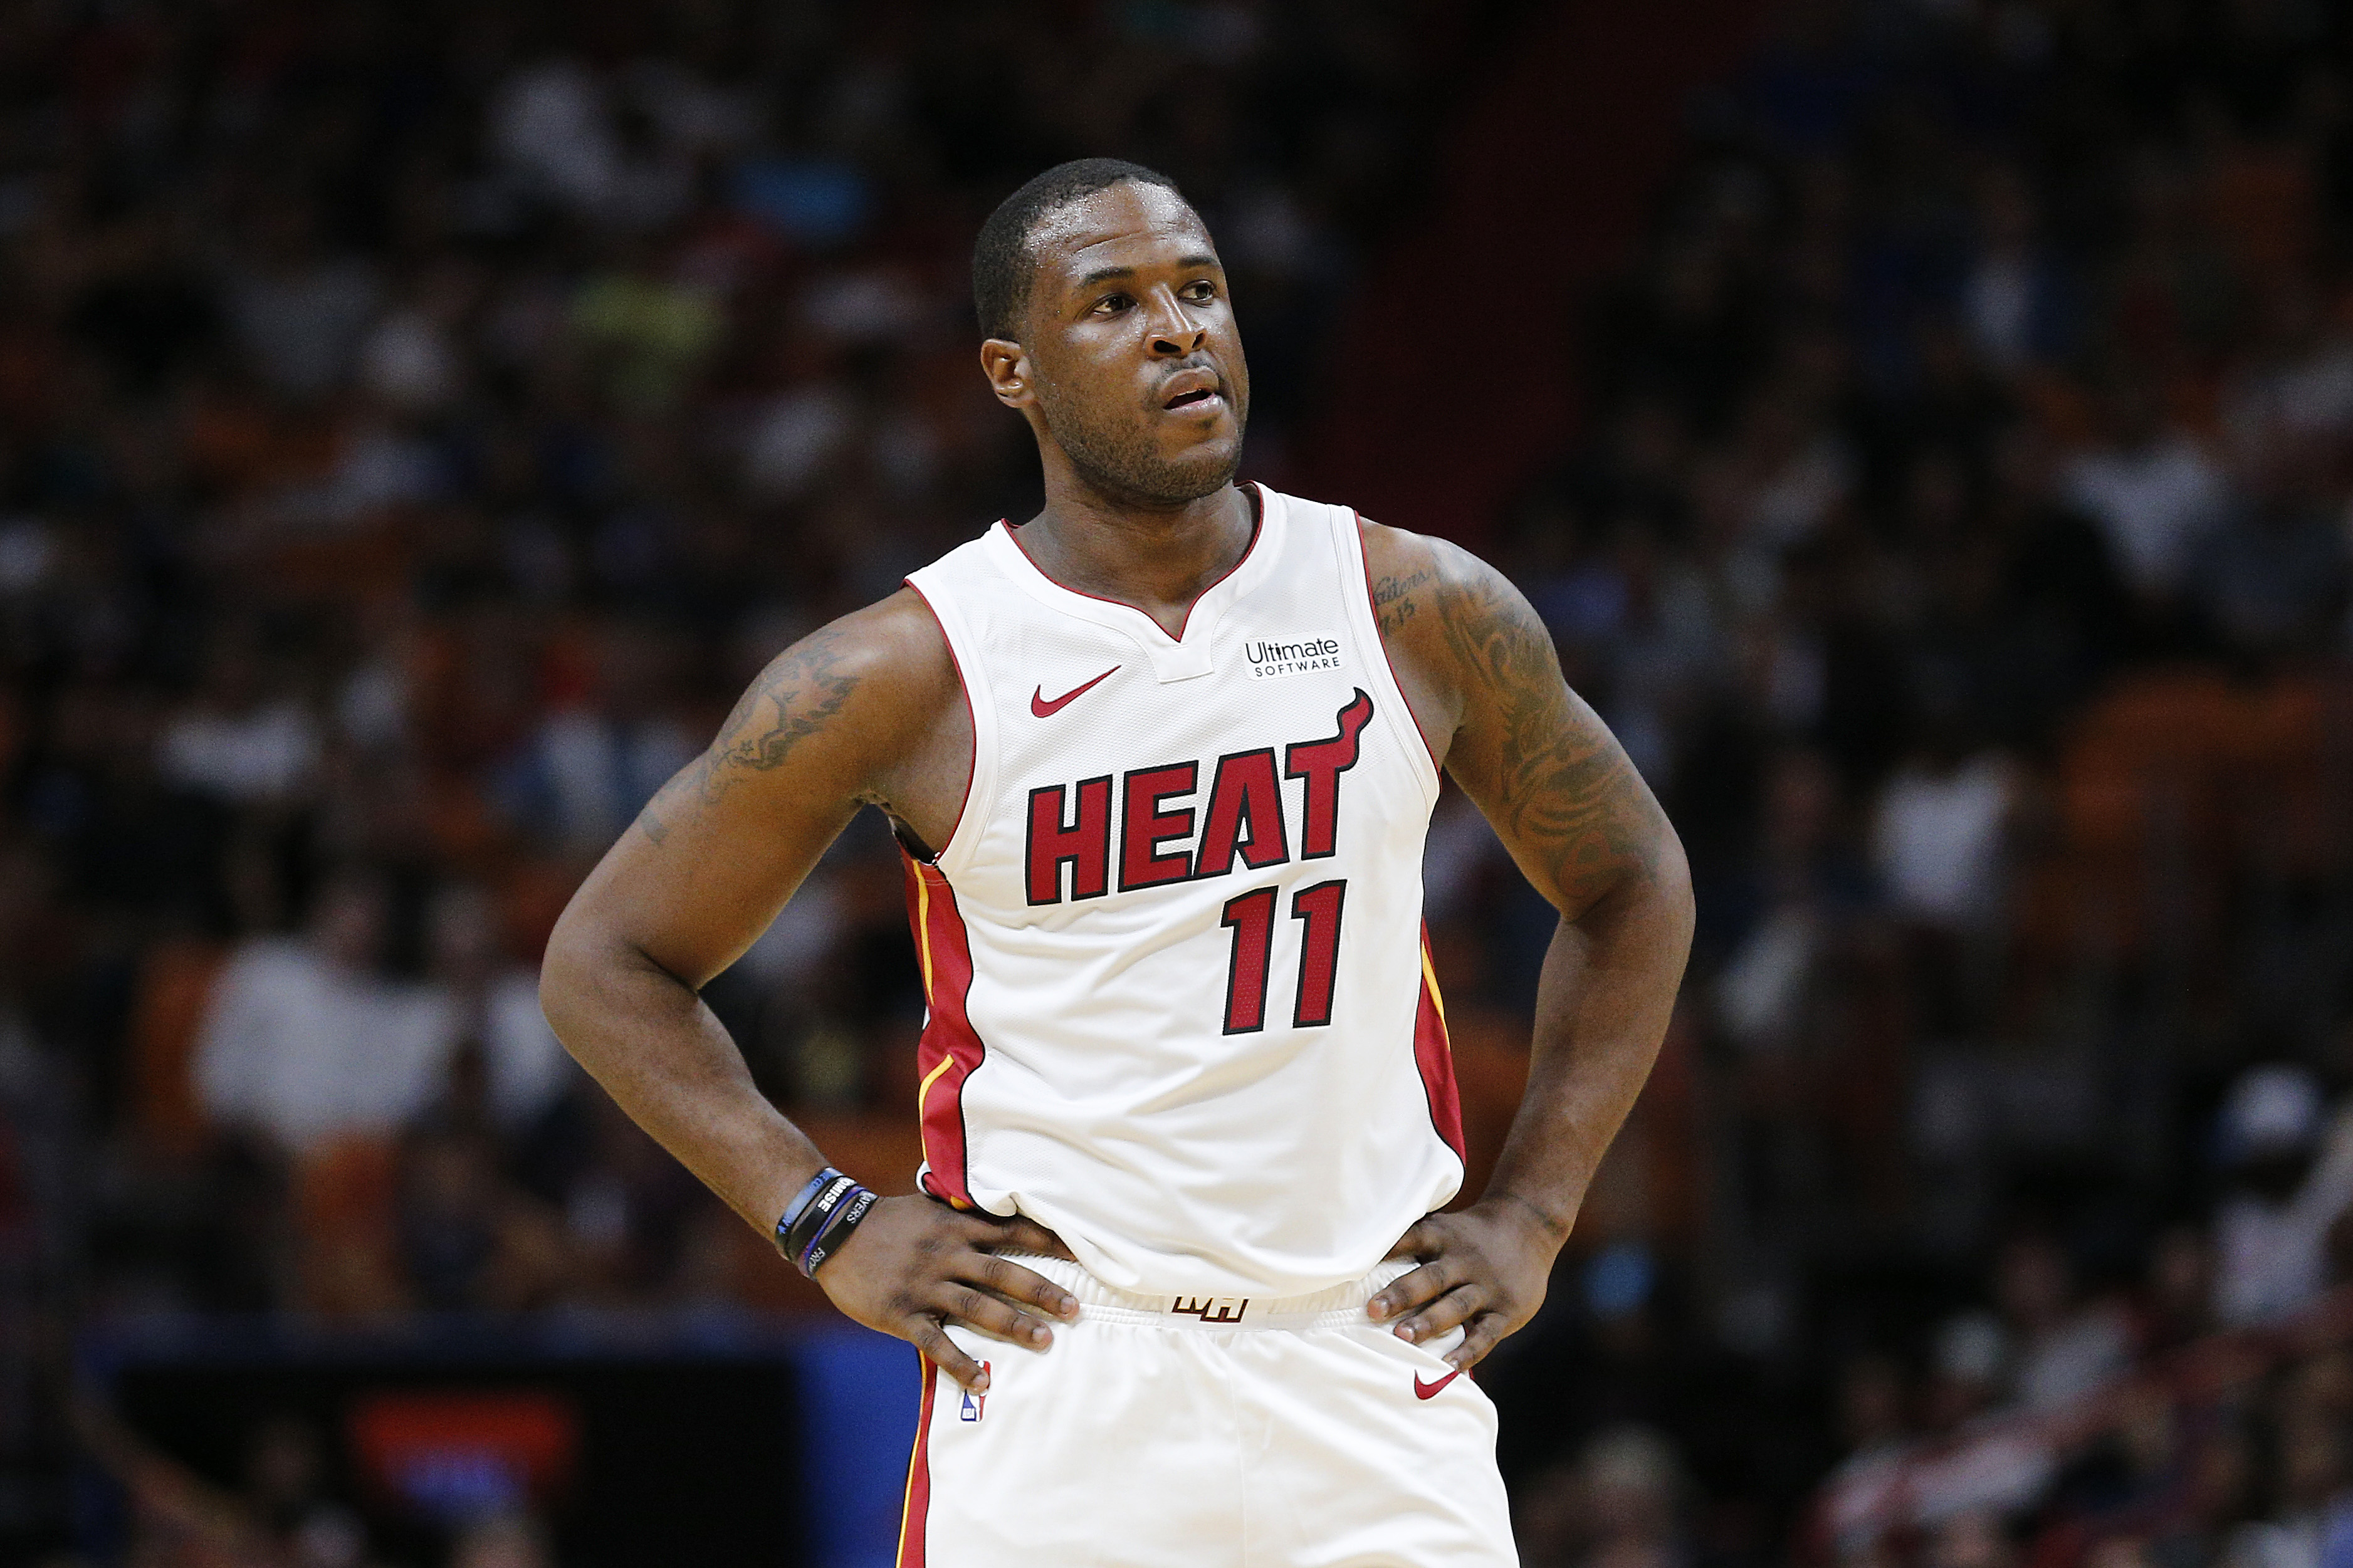 Lakers sign former Heat, Cavs guard Dion Waiters - The San Diego